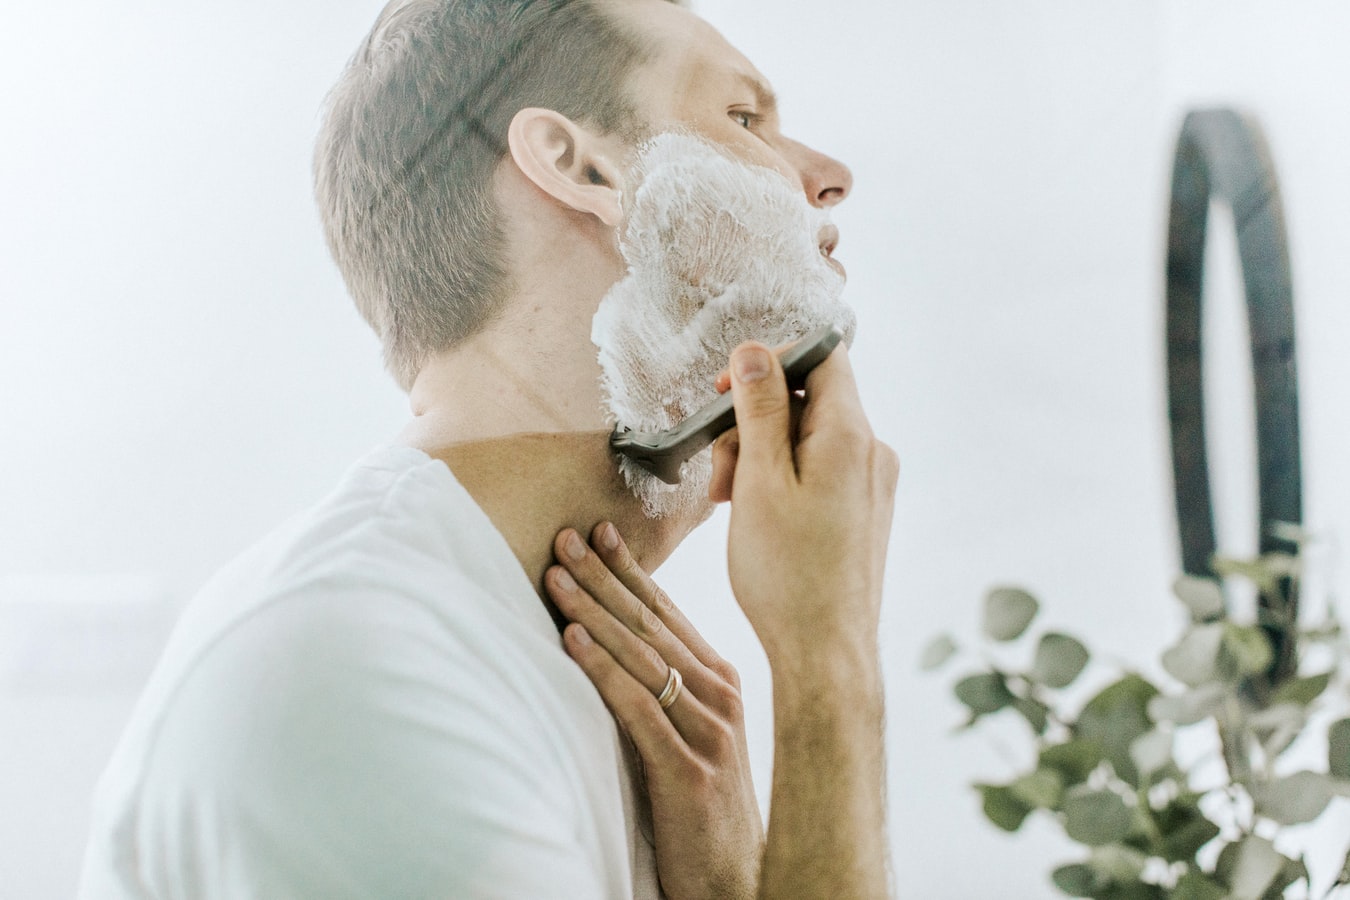 Why shave with a safety razor